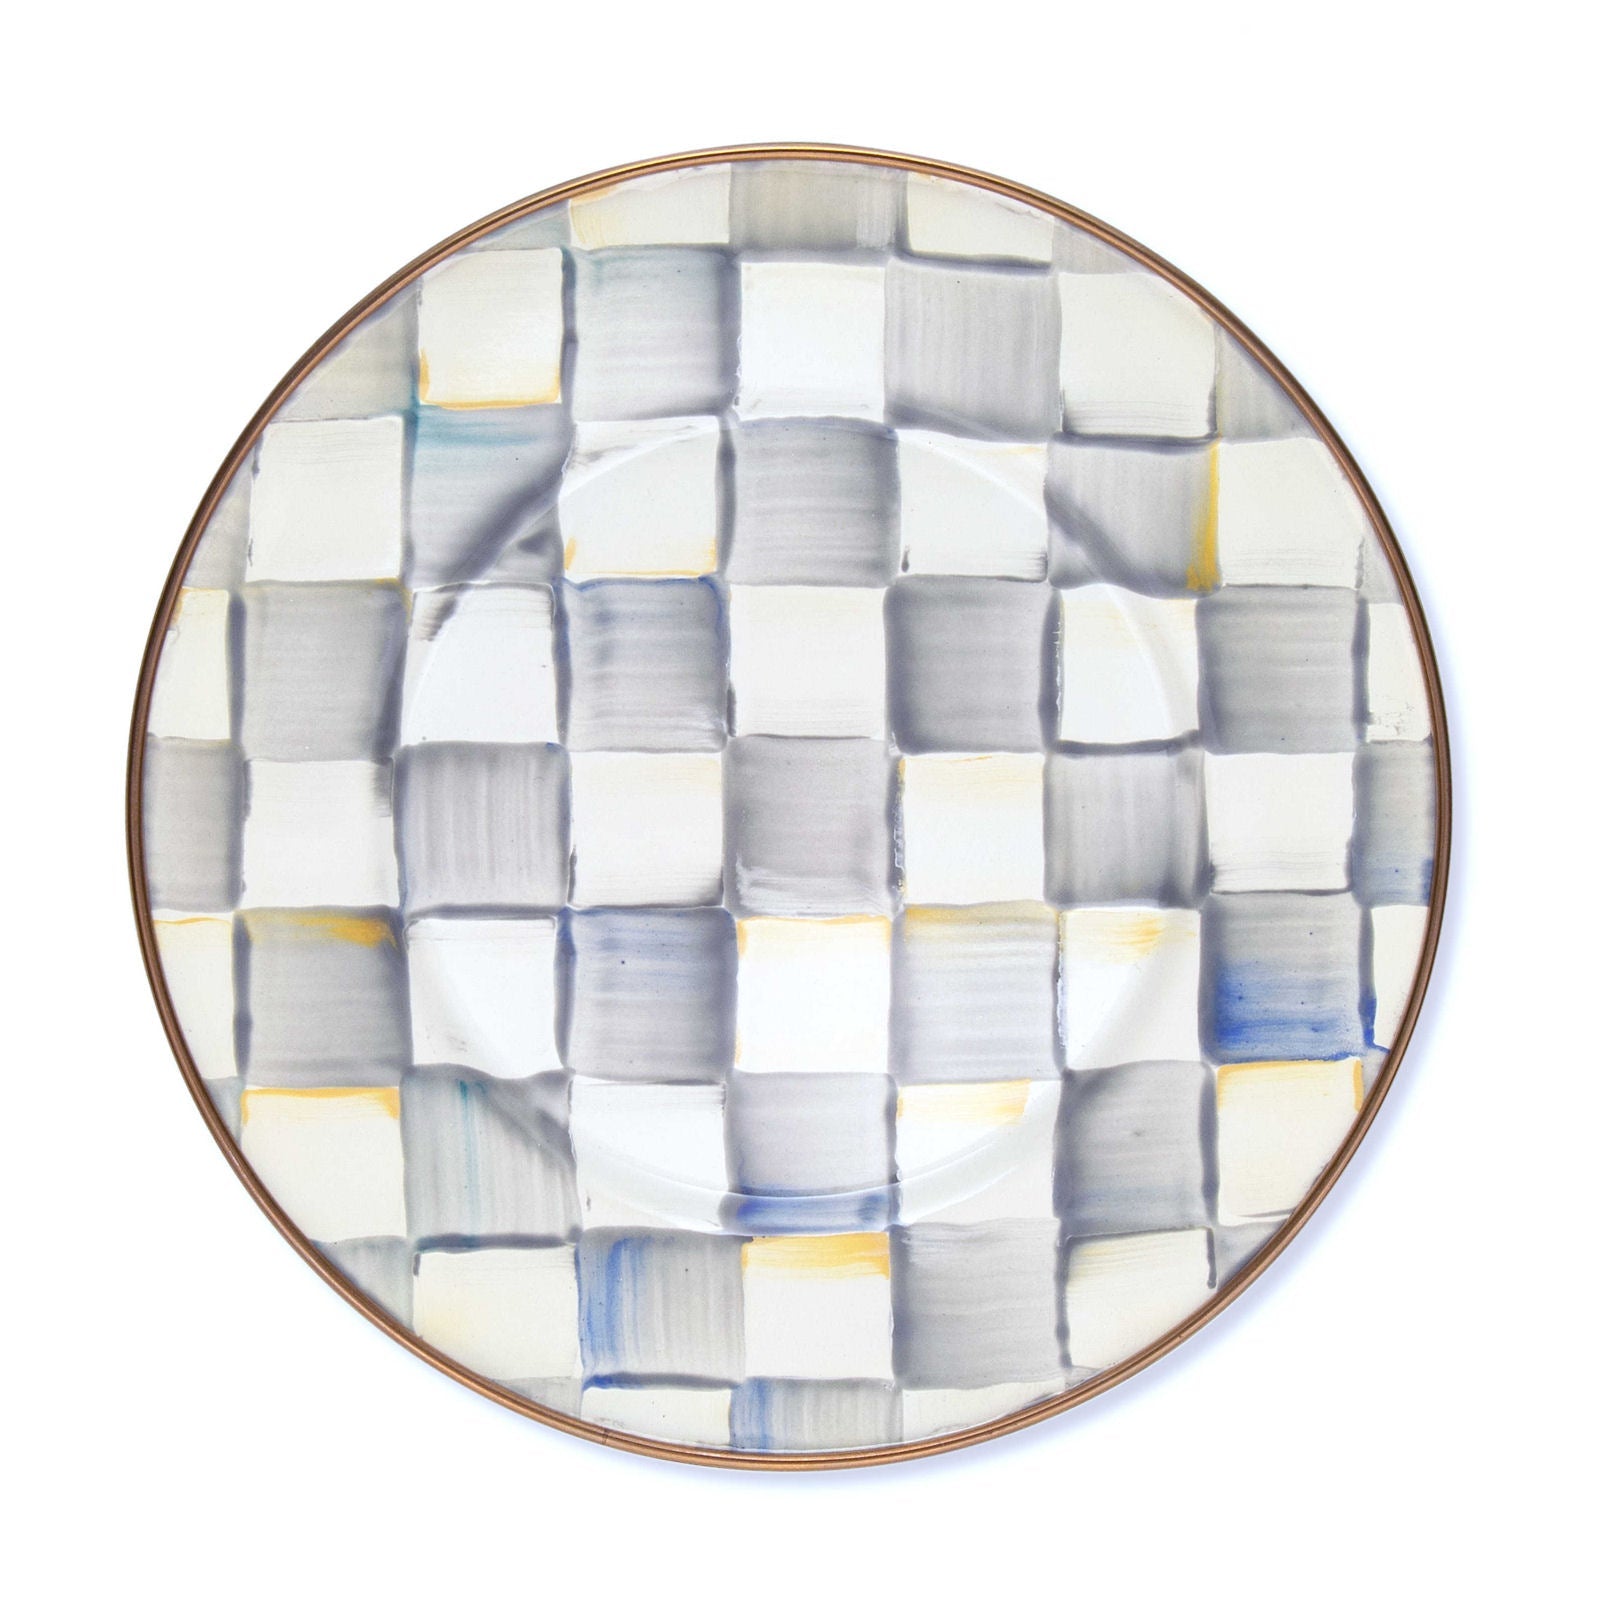 Sterling Check Enamel Dessert Plate by Mackenzie Childs - |VESIMI Design| Luxury and Rustic bathrooms online